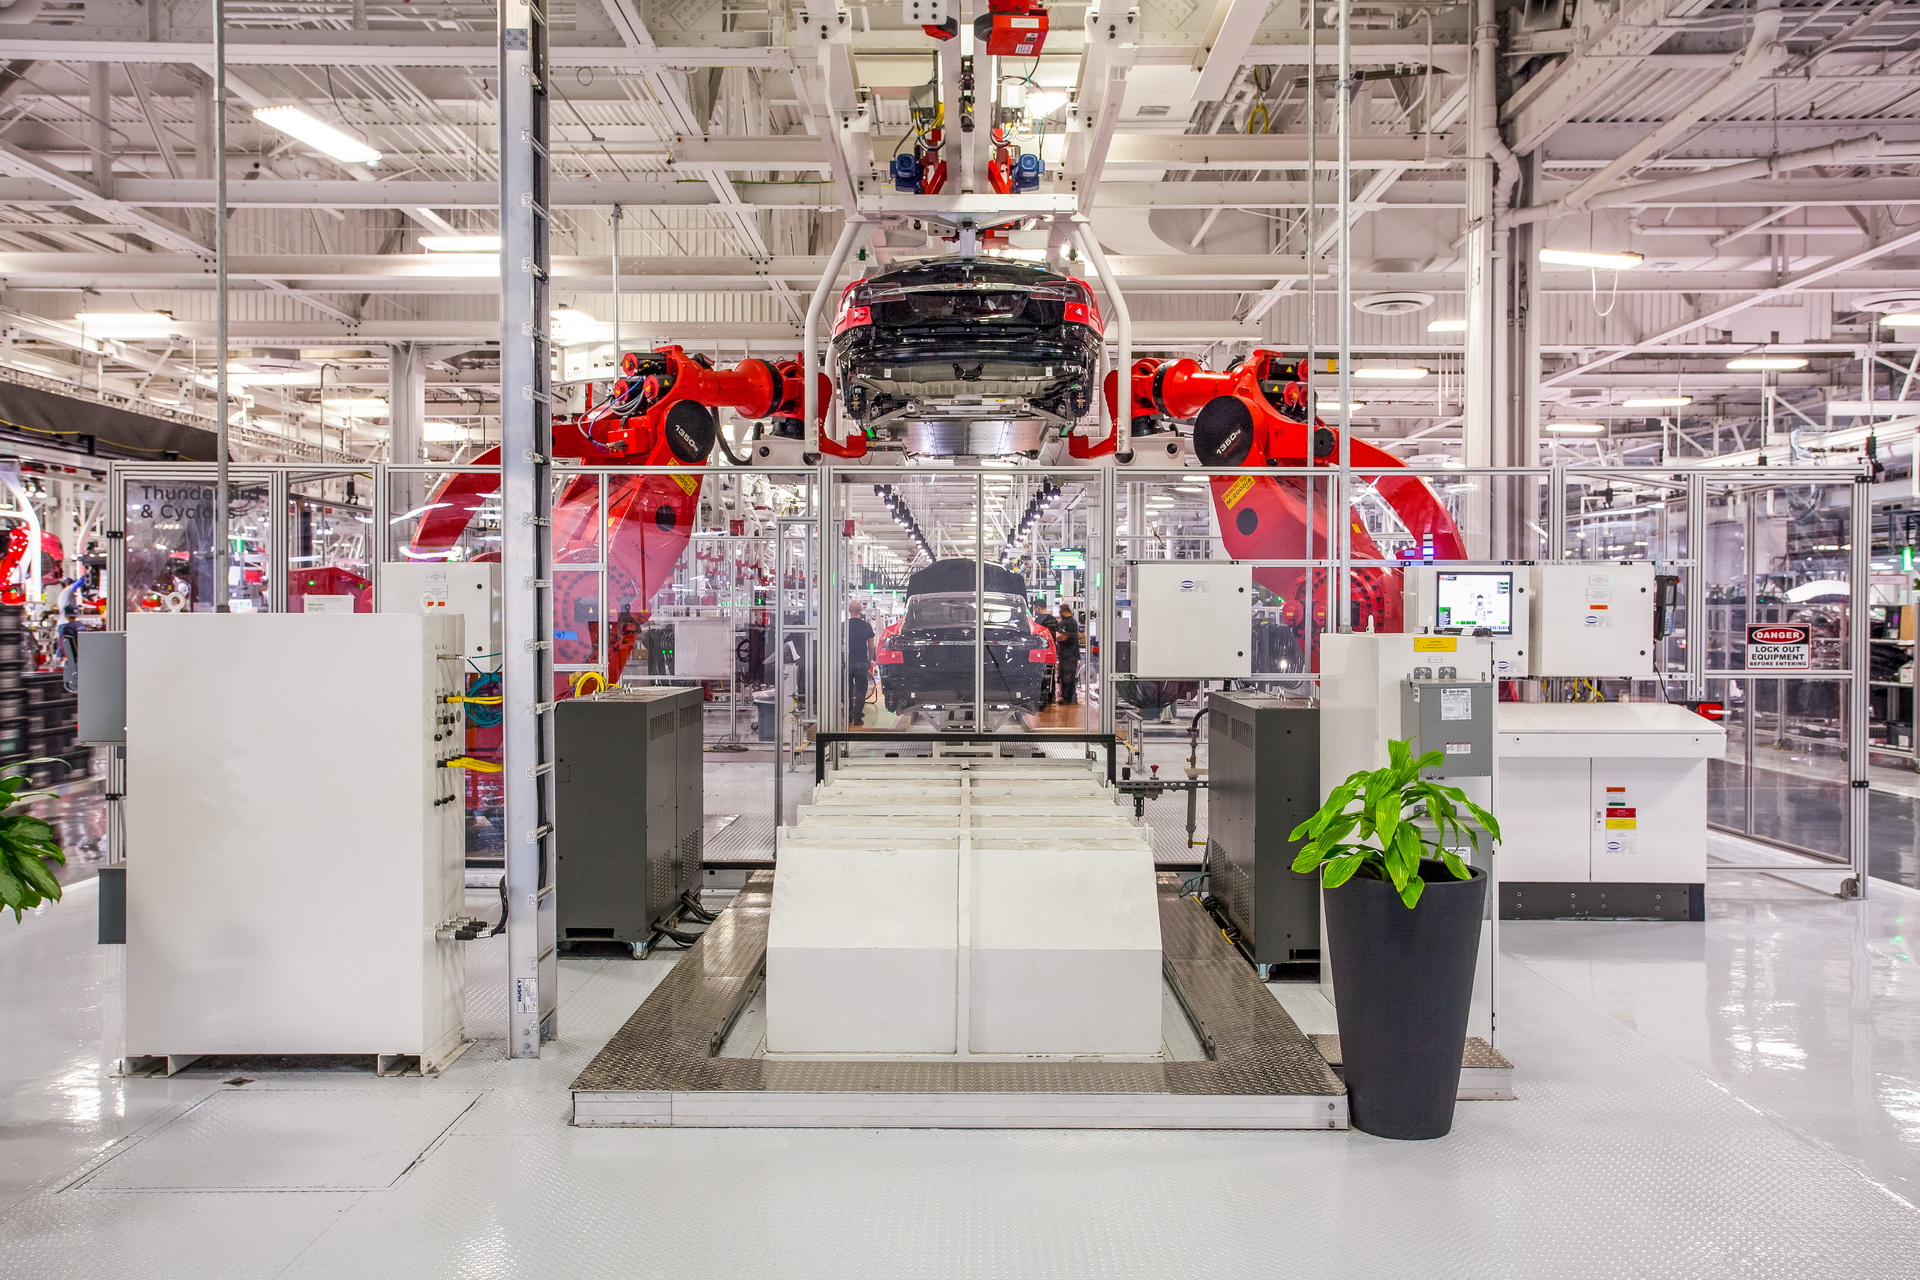 Tesla Plans To Build a Second Plant In The U.S.